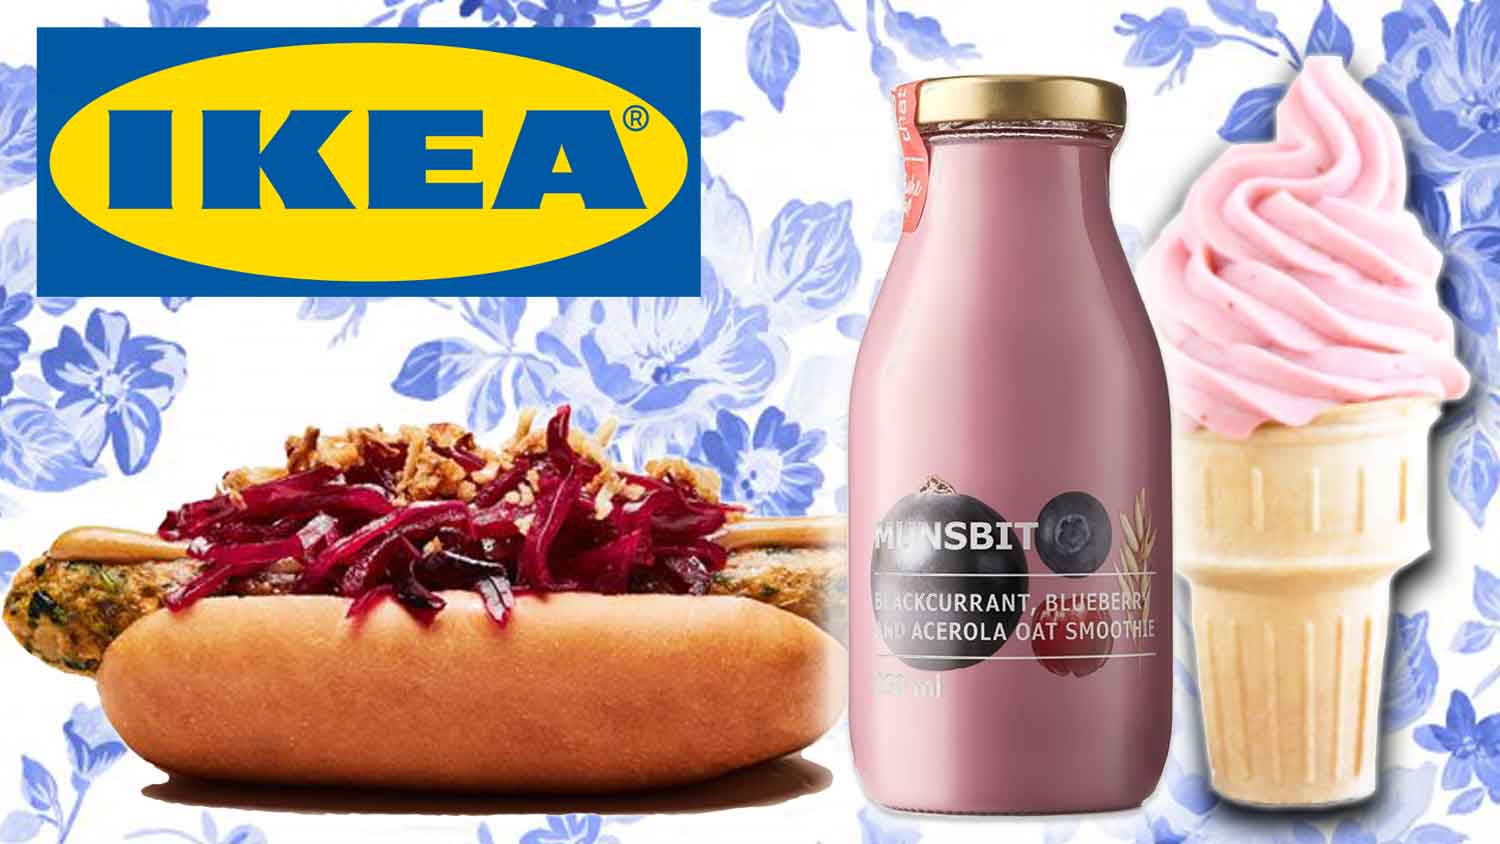 The Complete Vegan Guide to IKEA